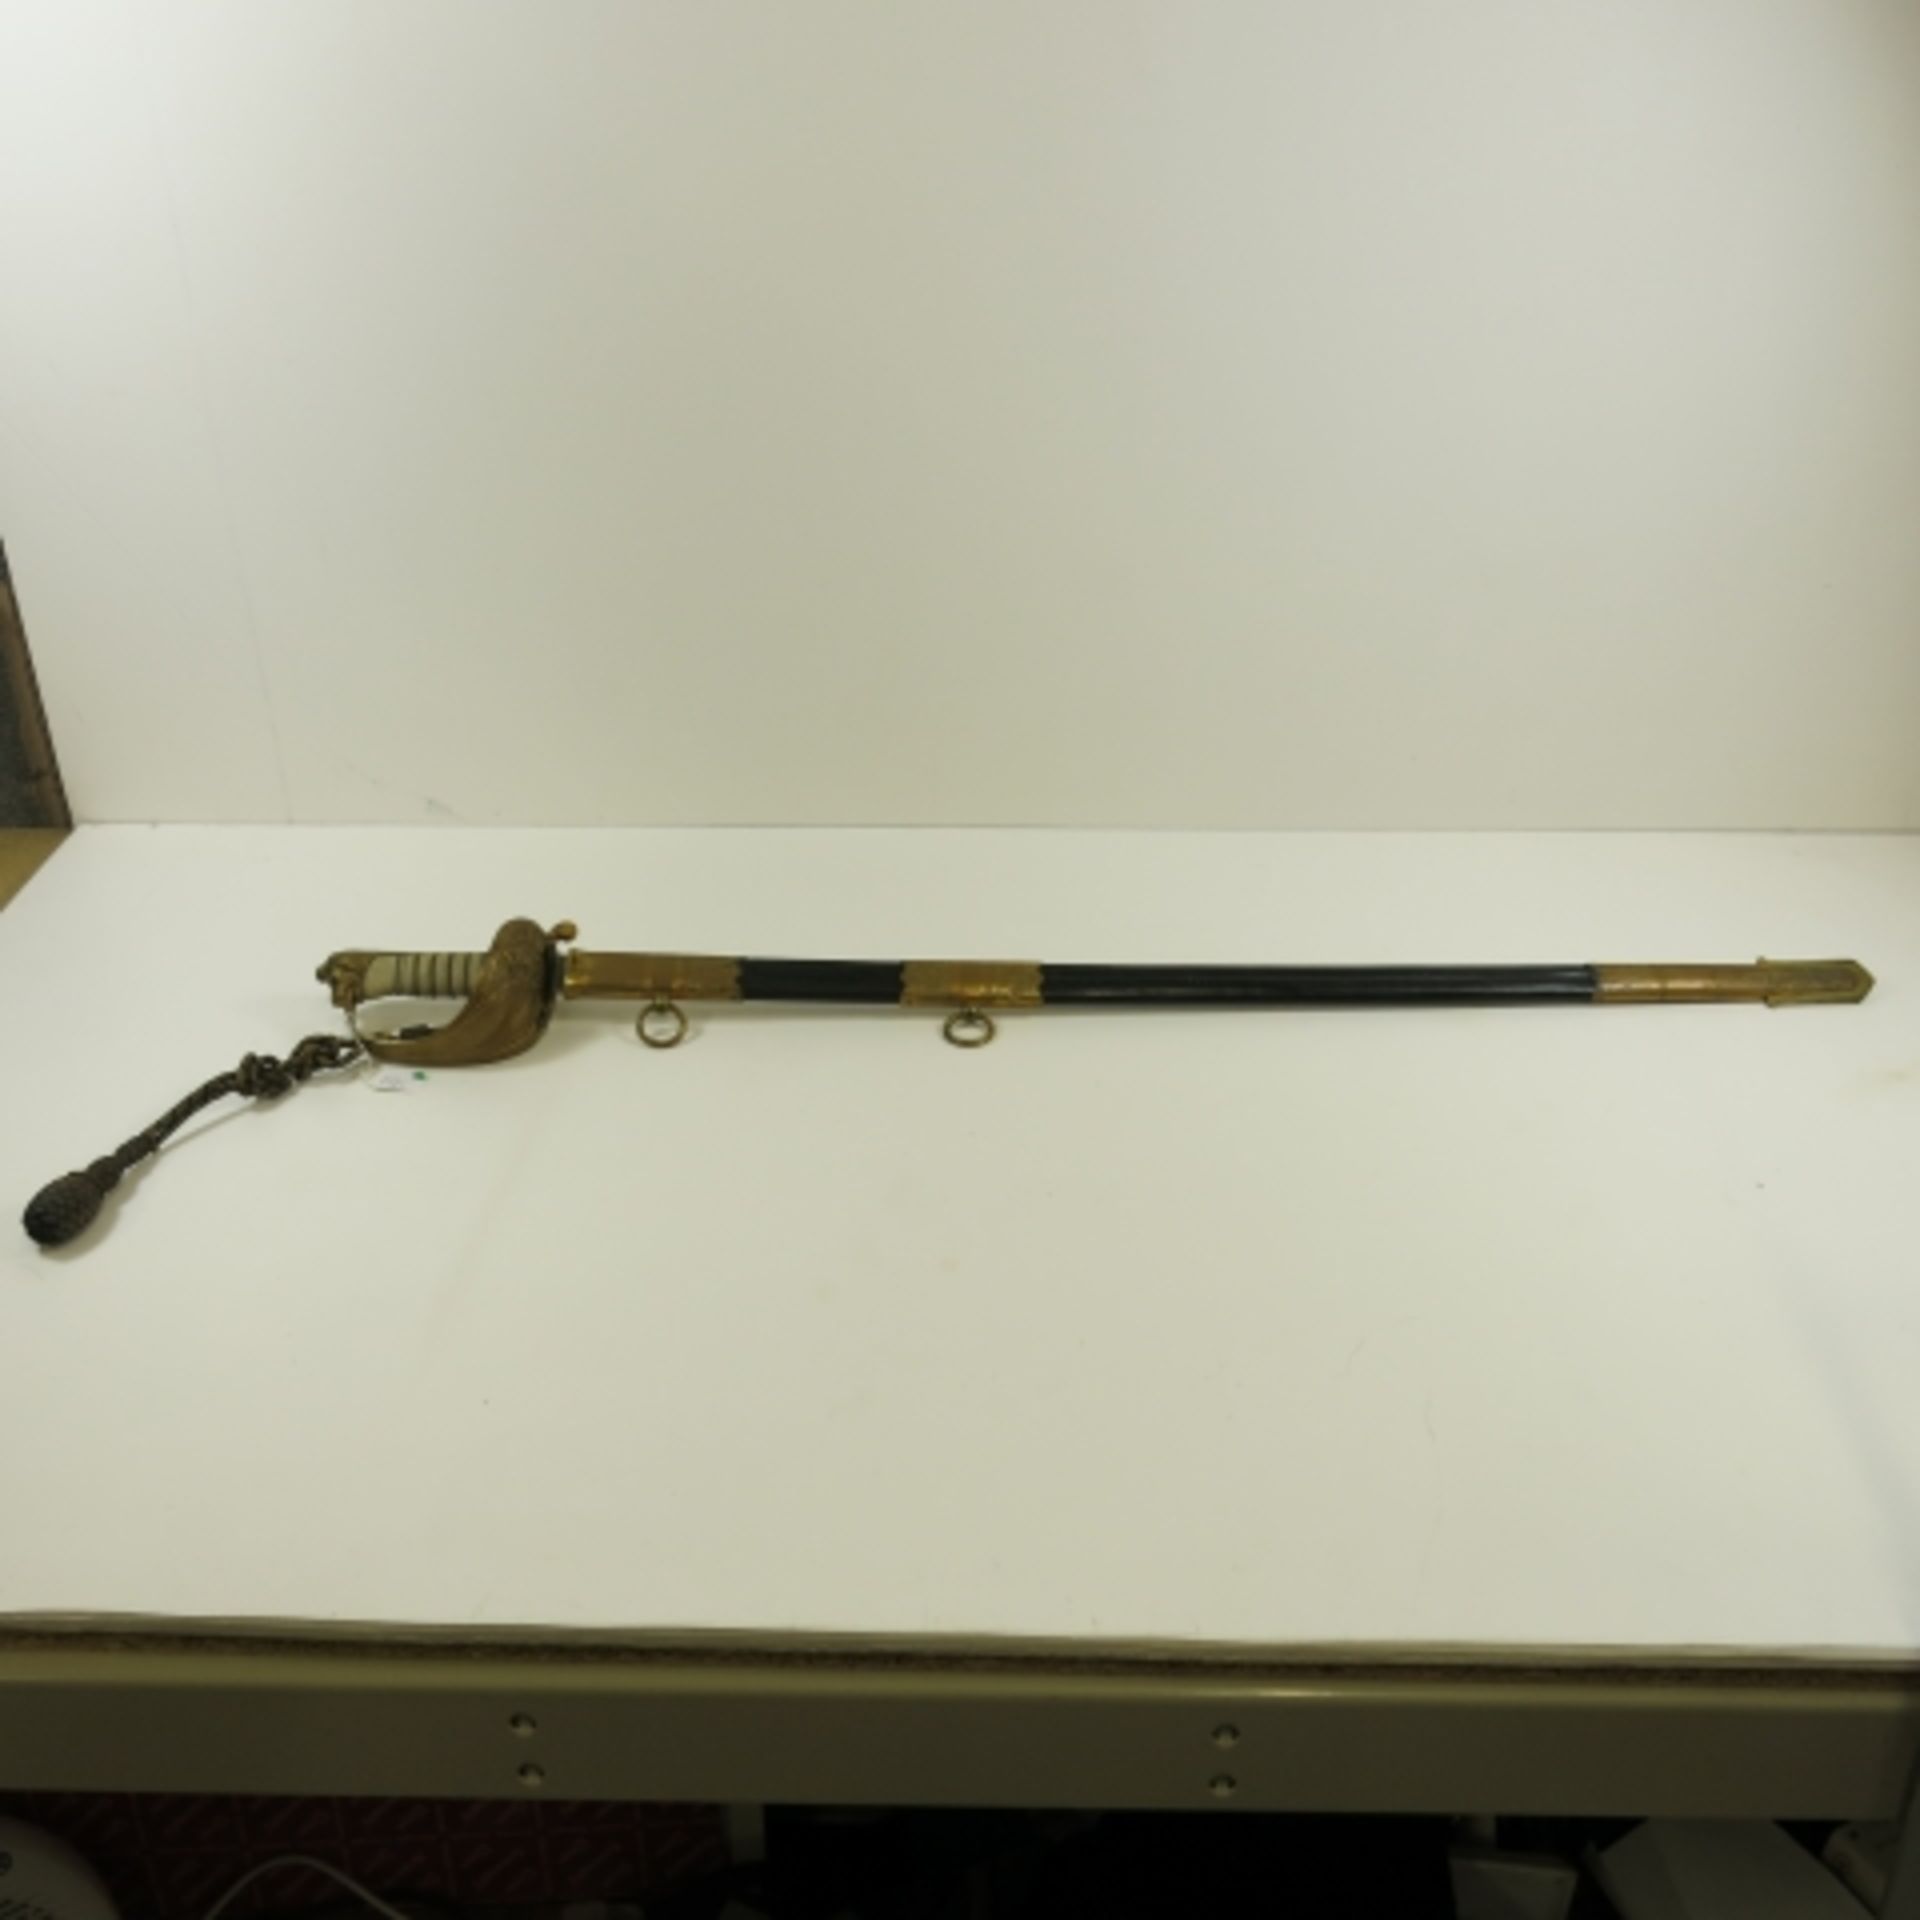 S.R Gould & Sons, Naval Outfitters Devonport. A 20th century Naval Officer's Dress Sword, having